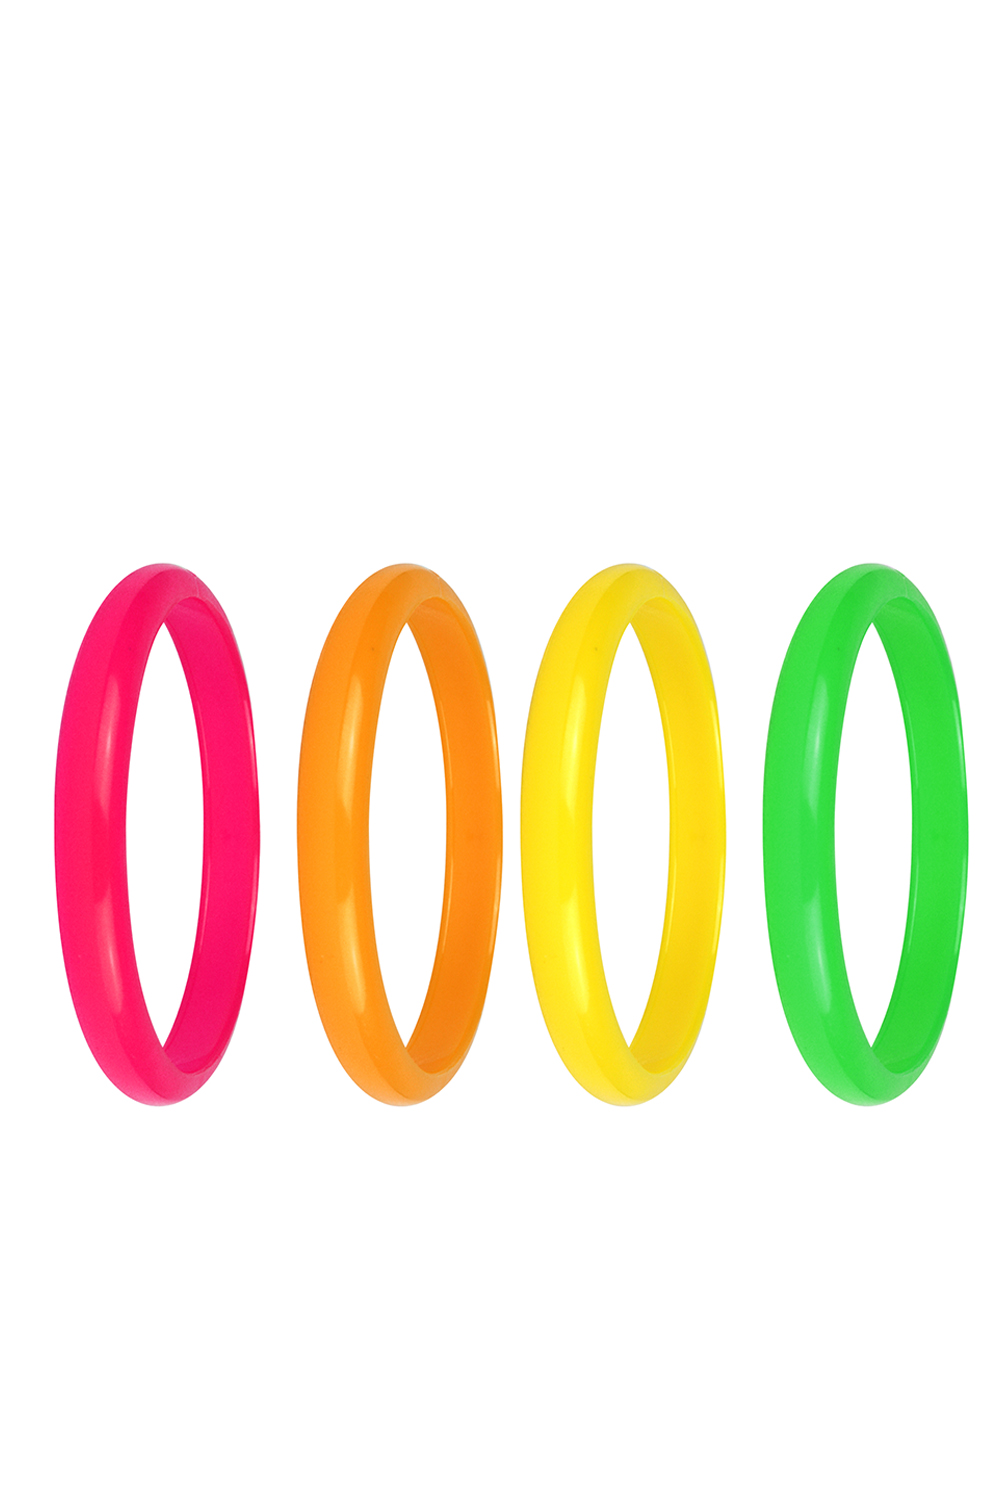 4 Assorted Colour Neon Bangles 15cm (Pack of 12)